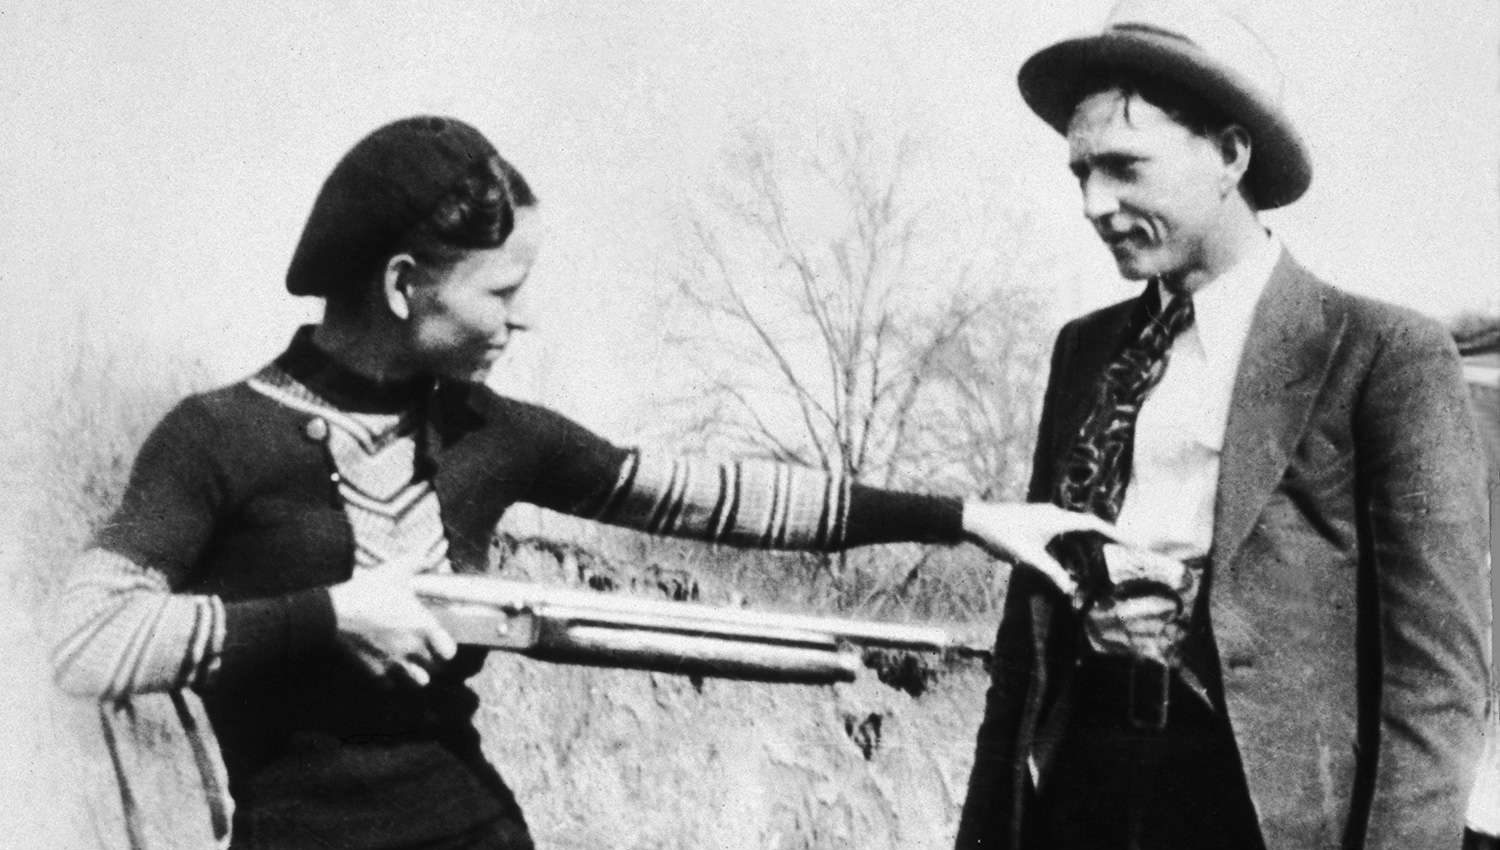 Bonnie Parker jokingly points rifle at Clyde Barrow in black and white historic photo.